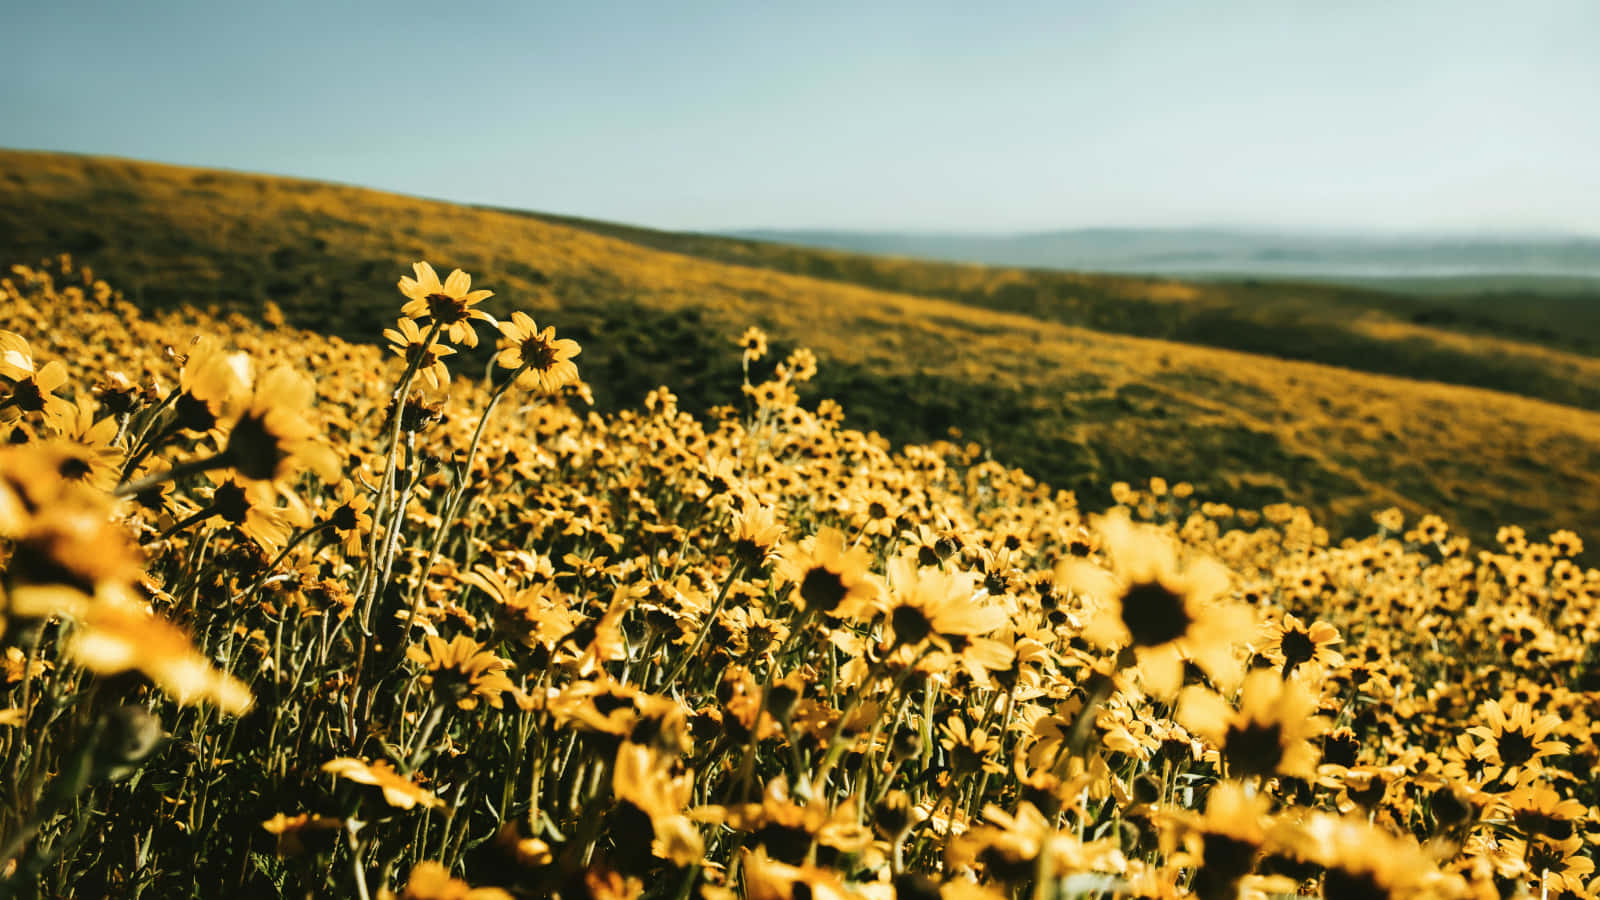 A Field Of Sunflowers In The Middle Of A Hill Wallpaper